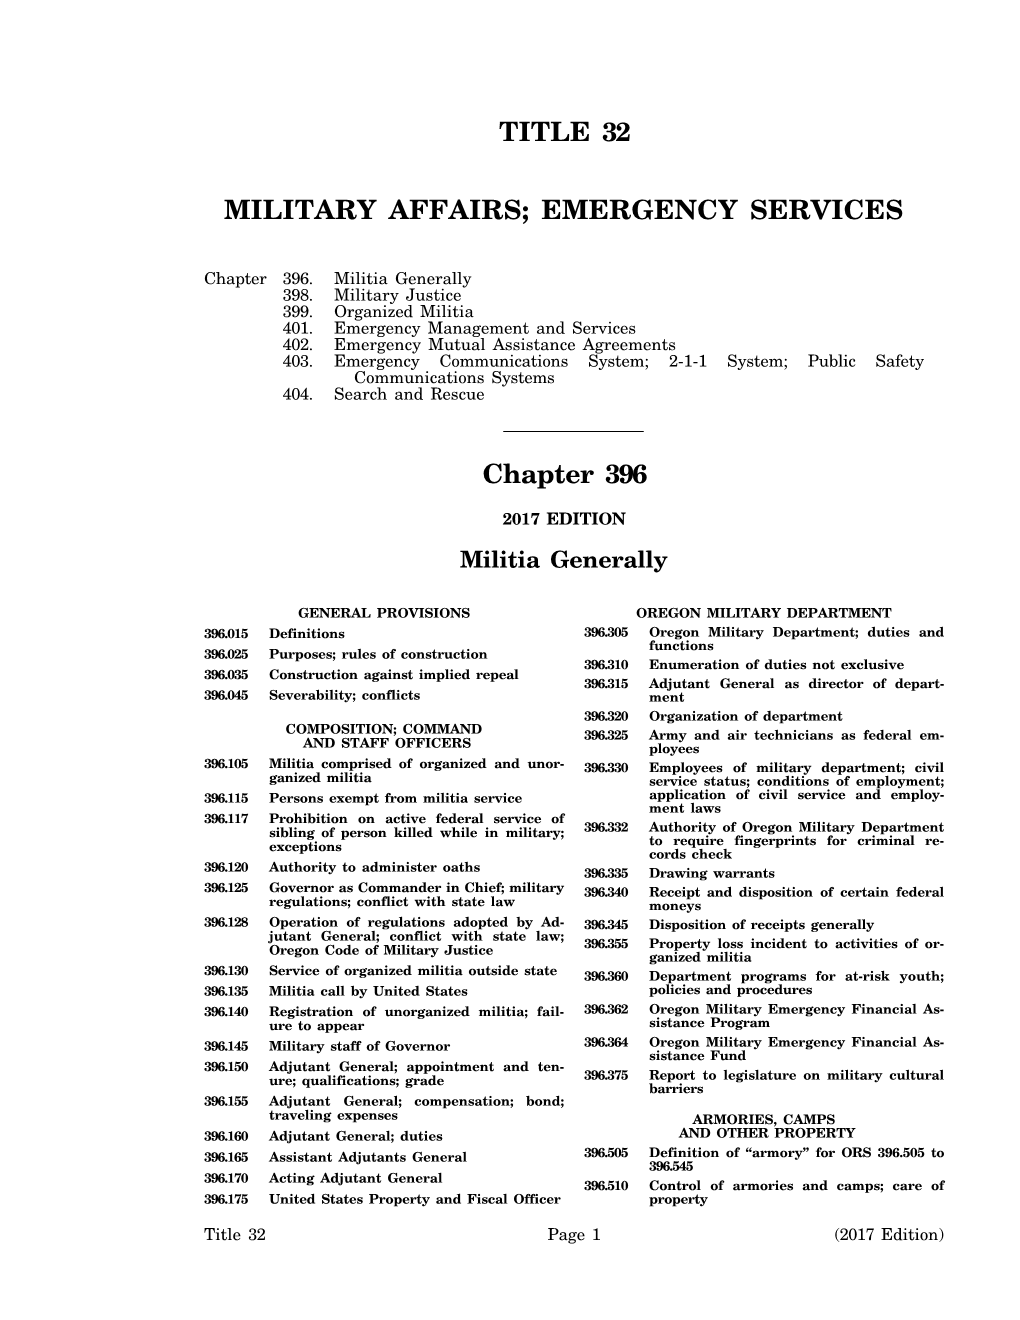 TITLE 32 MILITARY AFFAIRS; EMERGENCY SERVICES Chapter